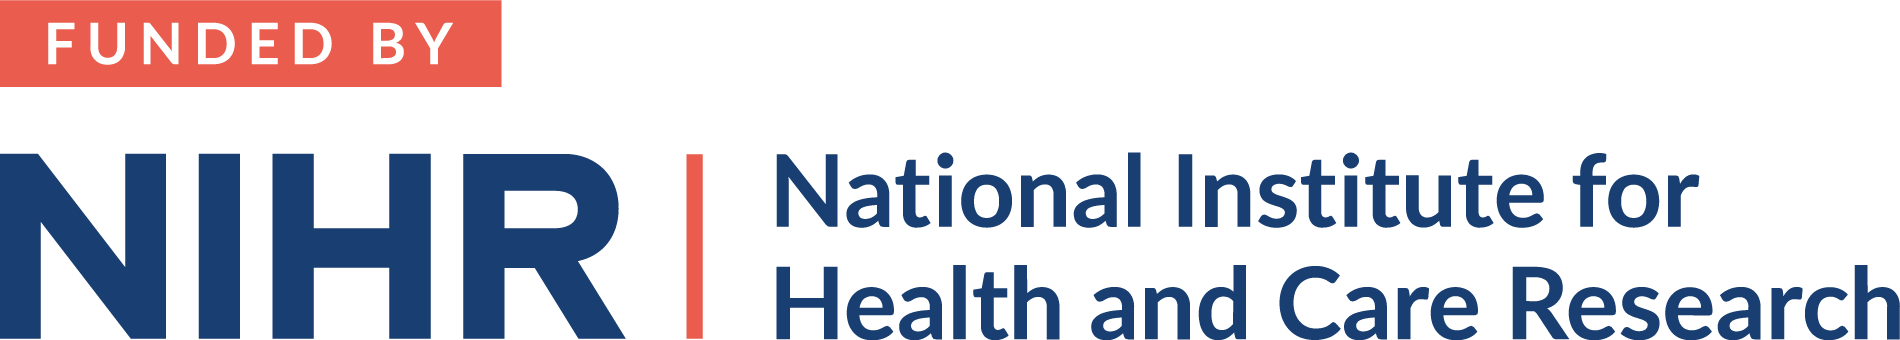 funded-by-nihr-logo.png